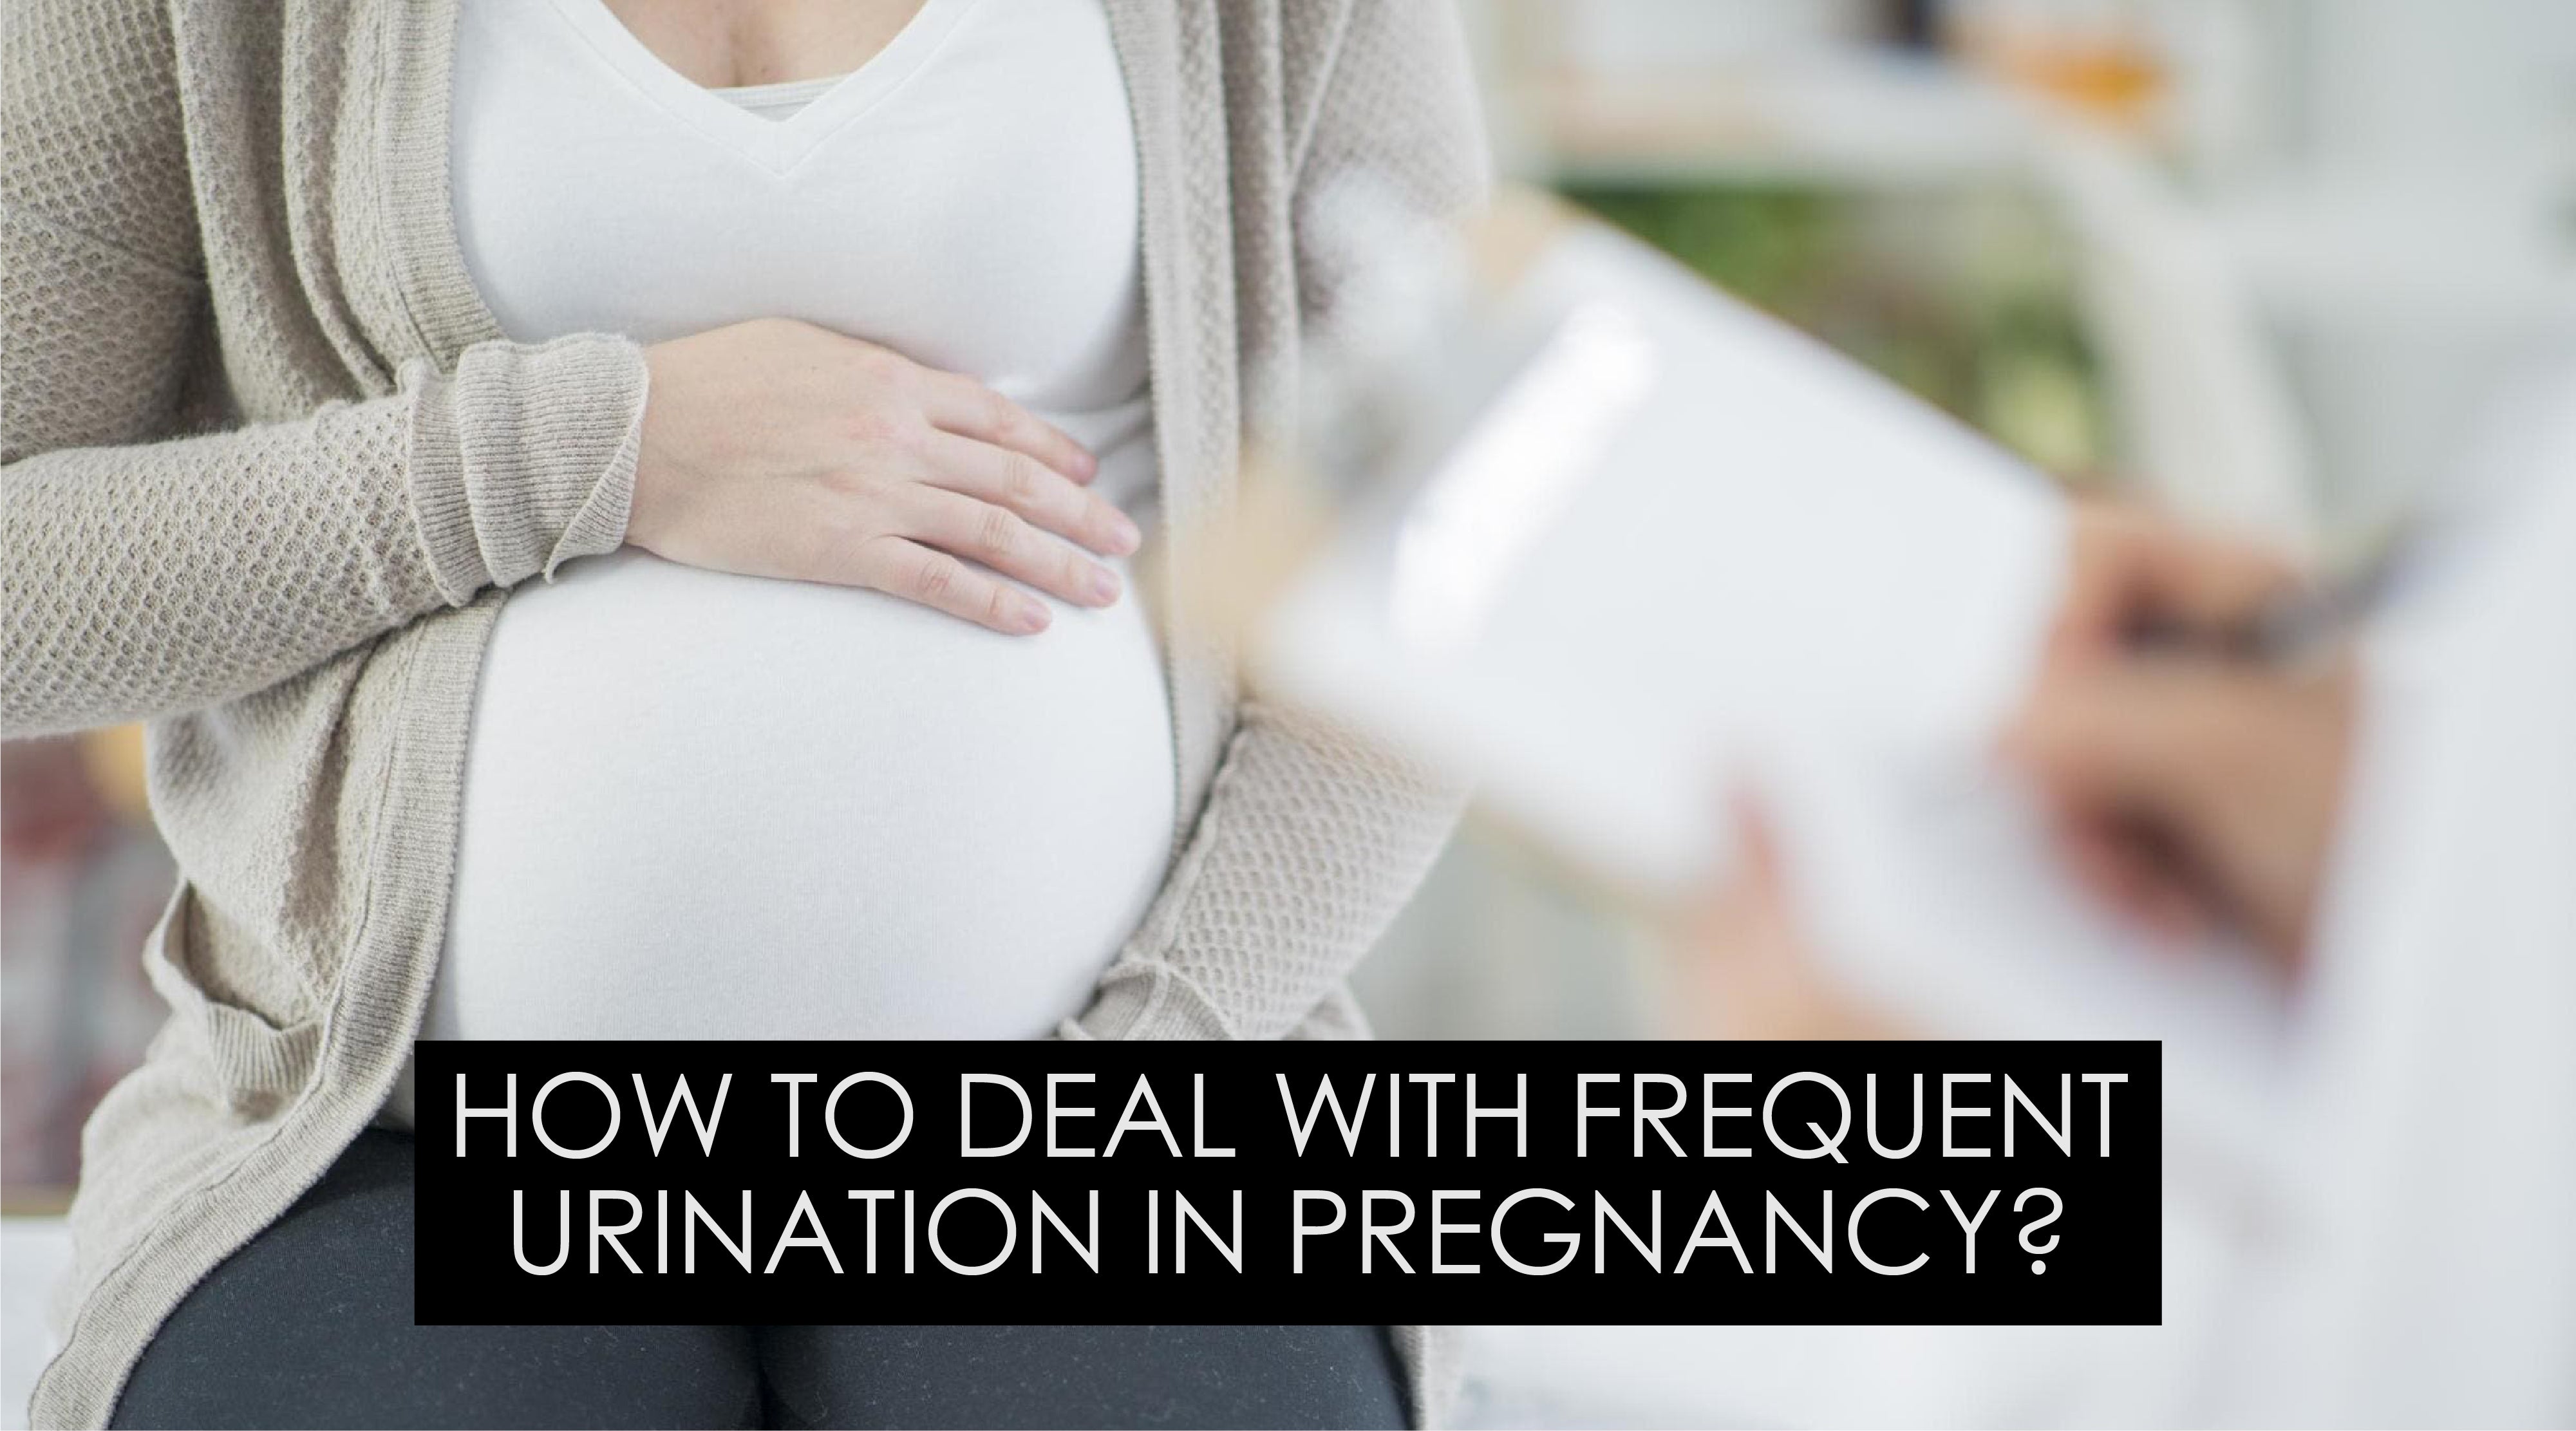 HOW TO DEAL WITH FREQUENT URINATION IN PREGNANCY? – MamaApp